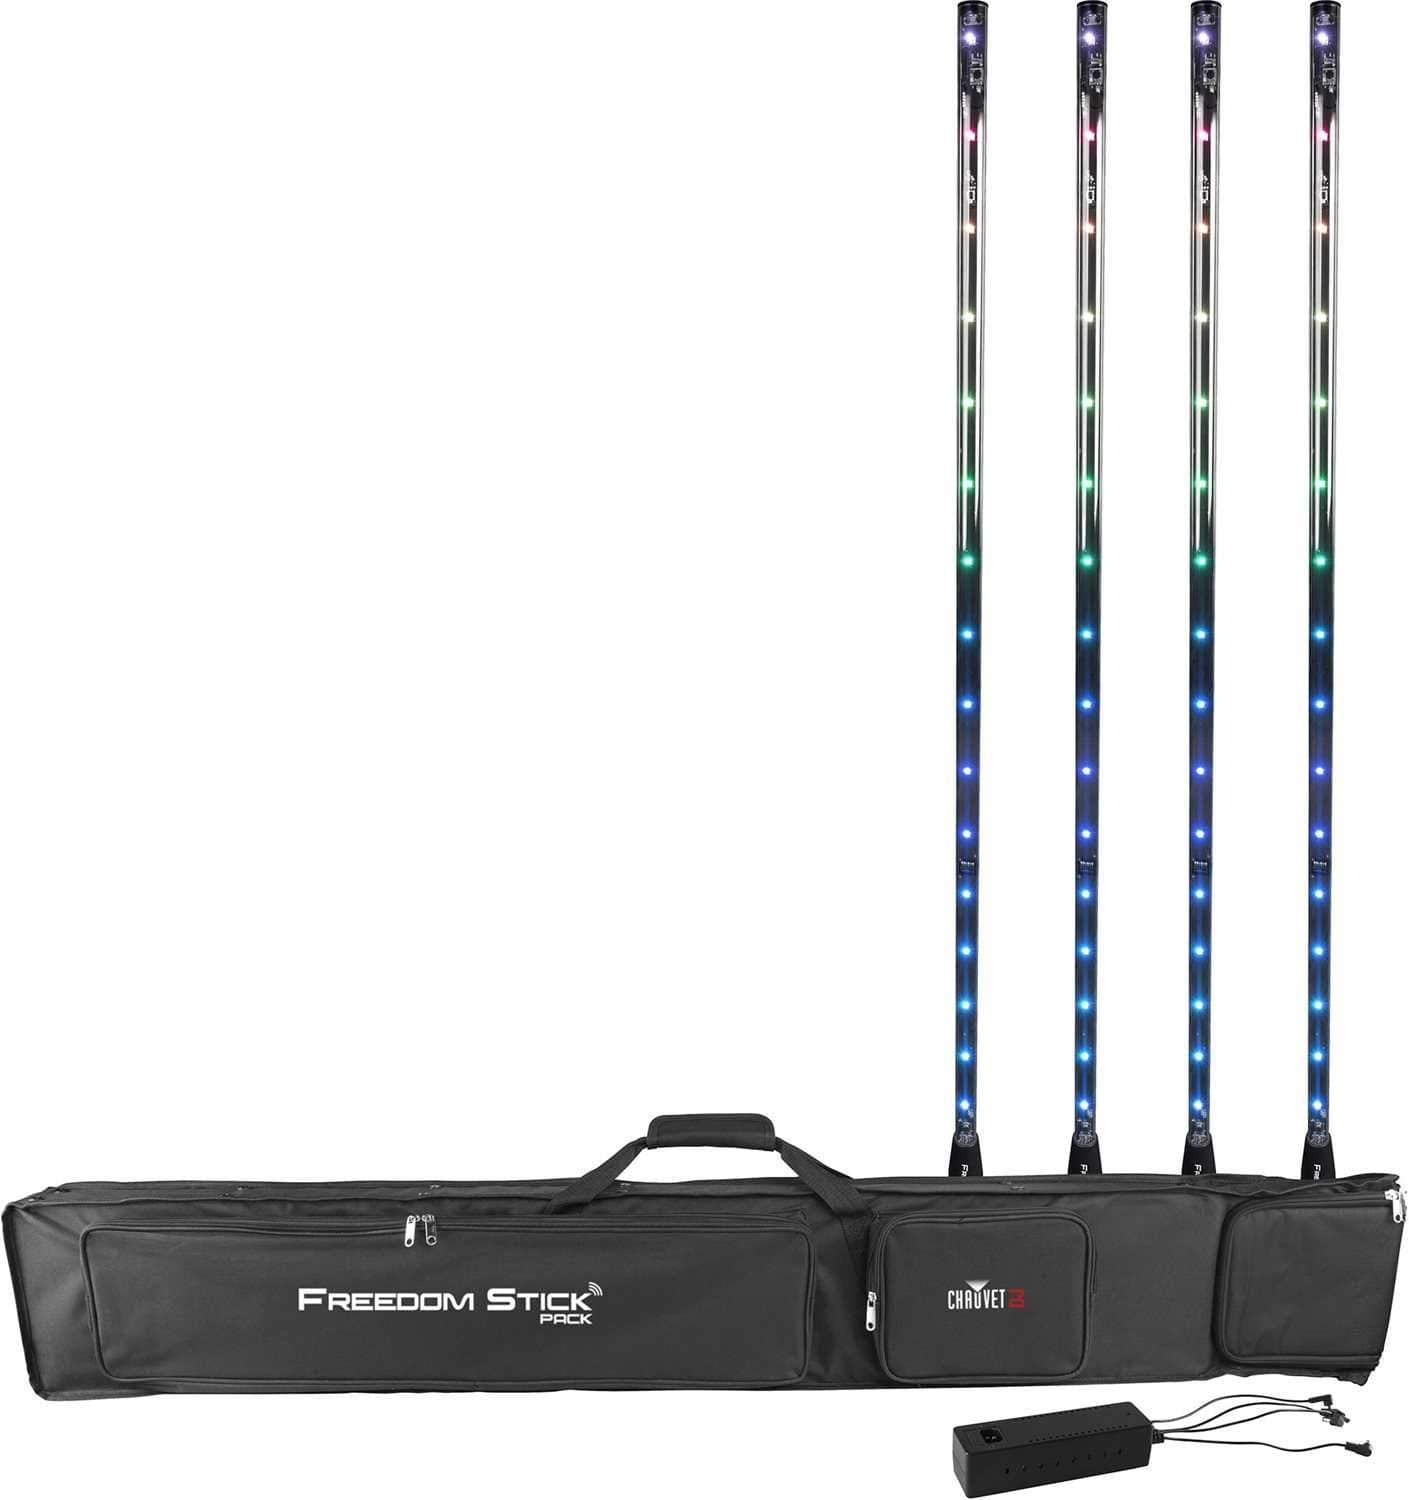 Chauvet Freedom Stick Pack Battery 4-Pack of LED Effects Lights - ProSound and Stage Lighting